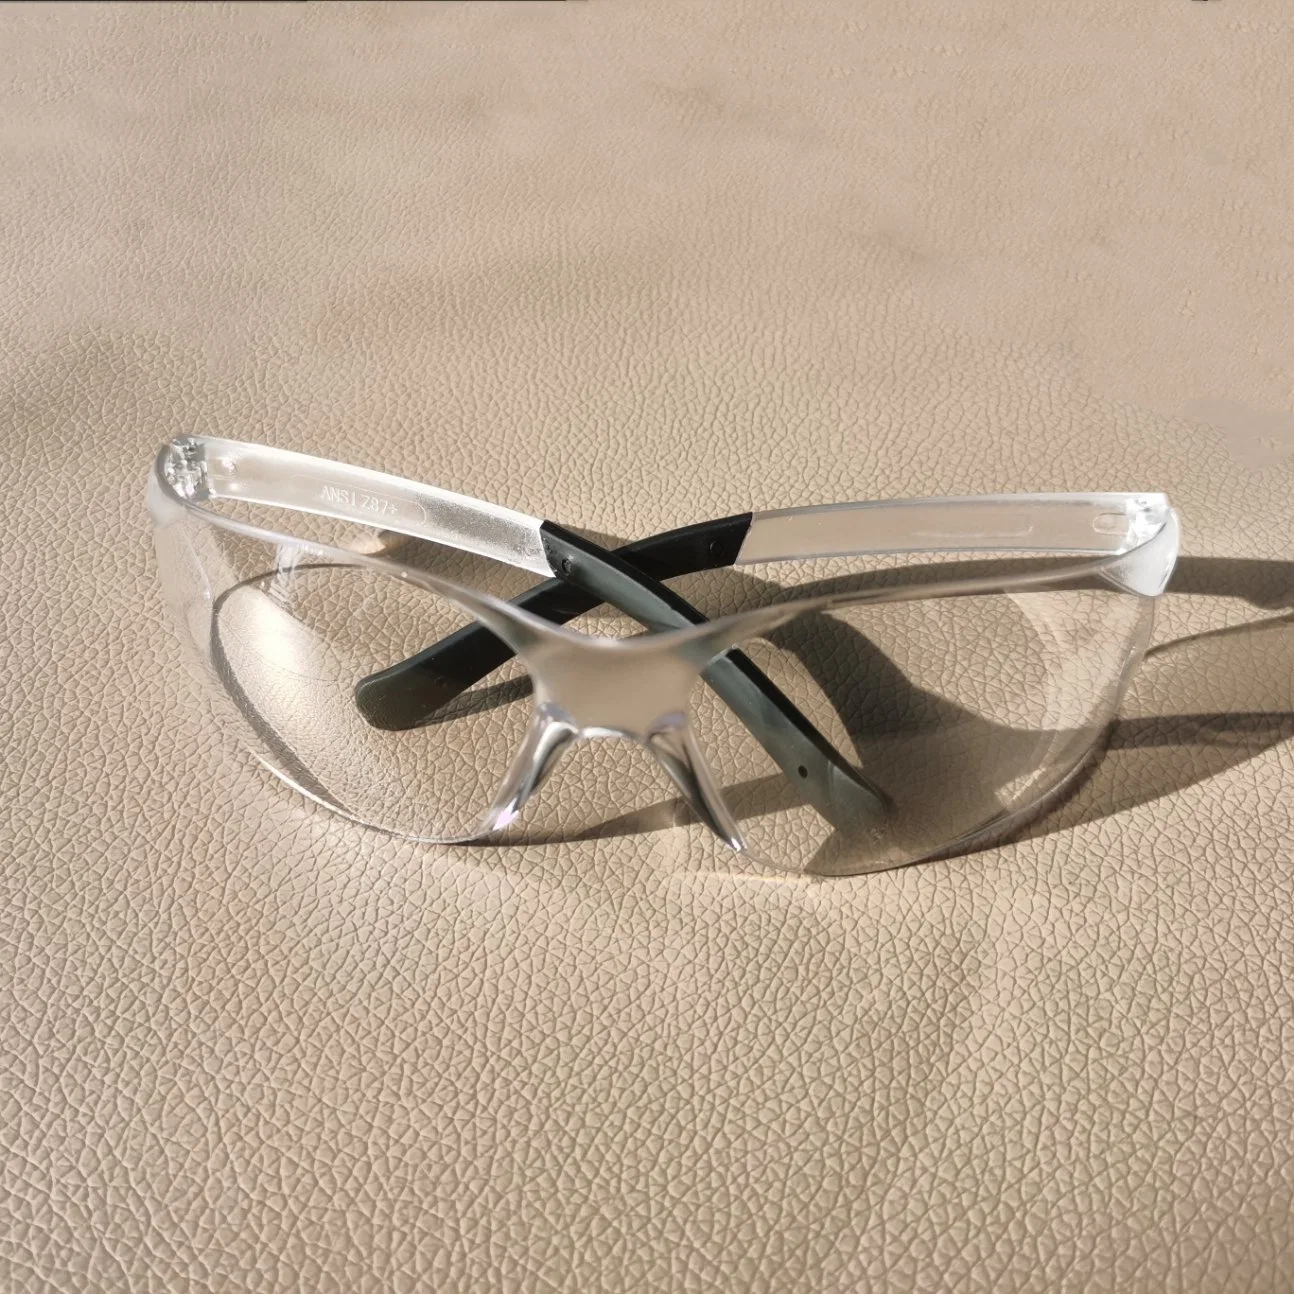 Protective Safety Glasses, Eye Protectors, Transparent Safety Glasses, Protective Safety Glasses